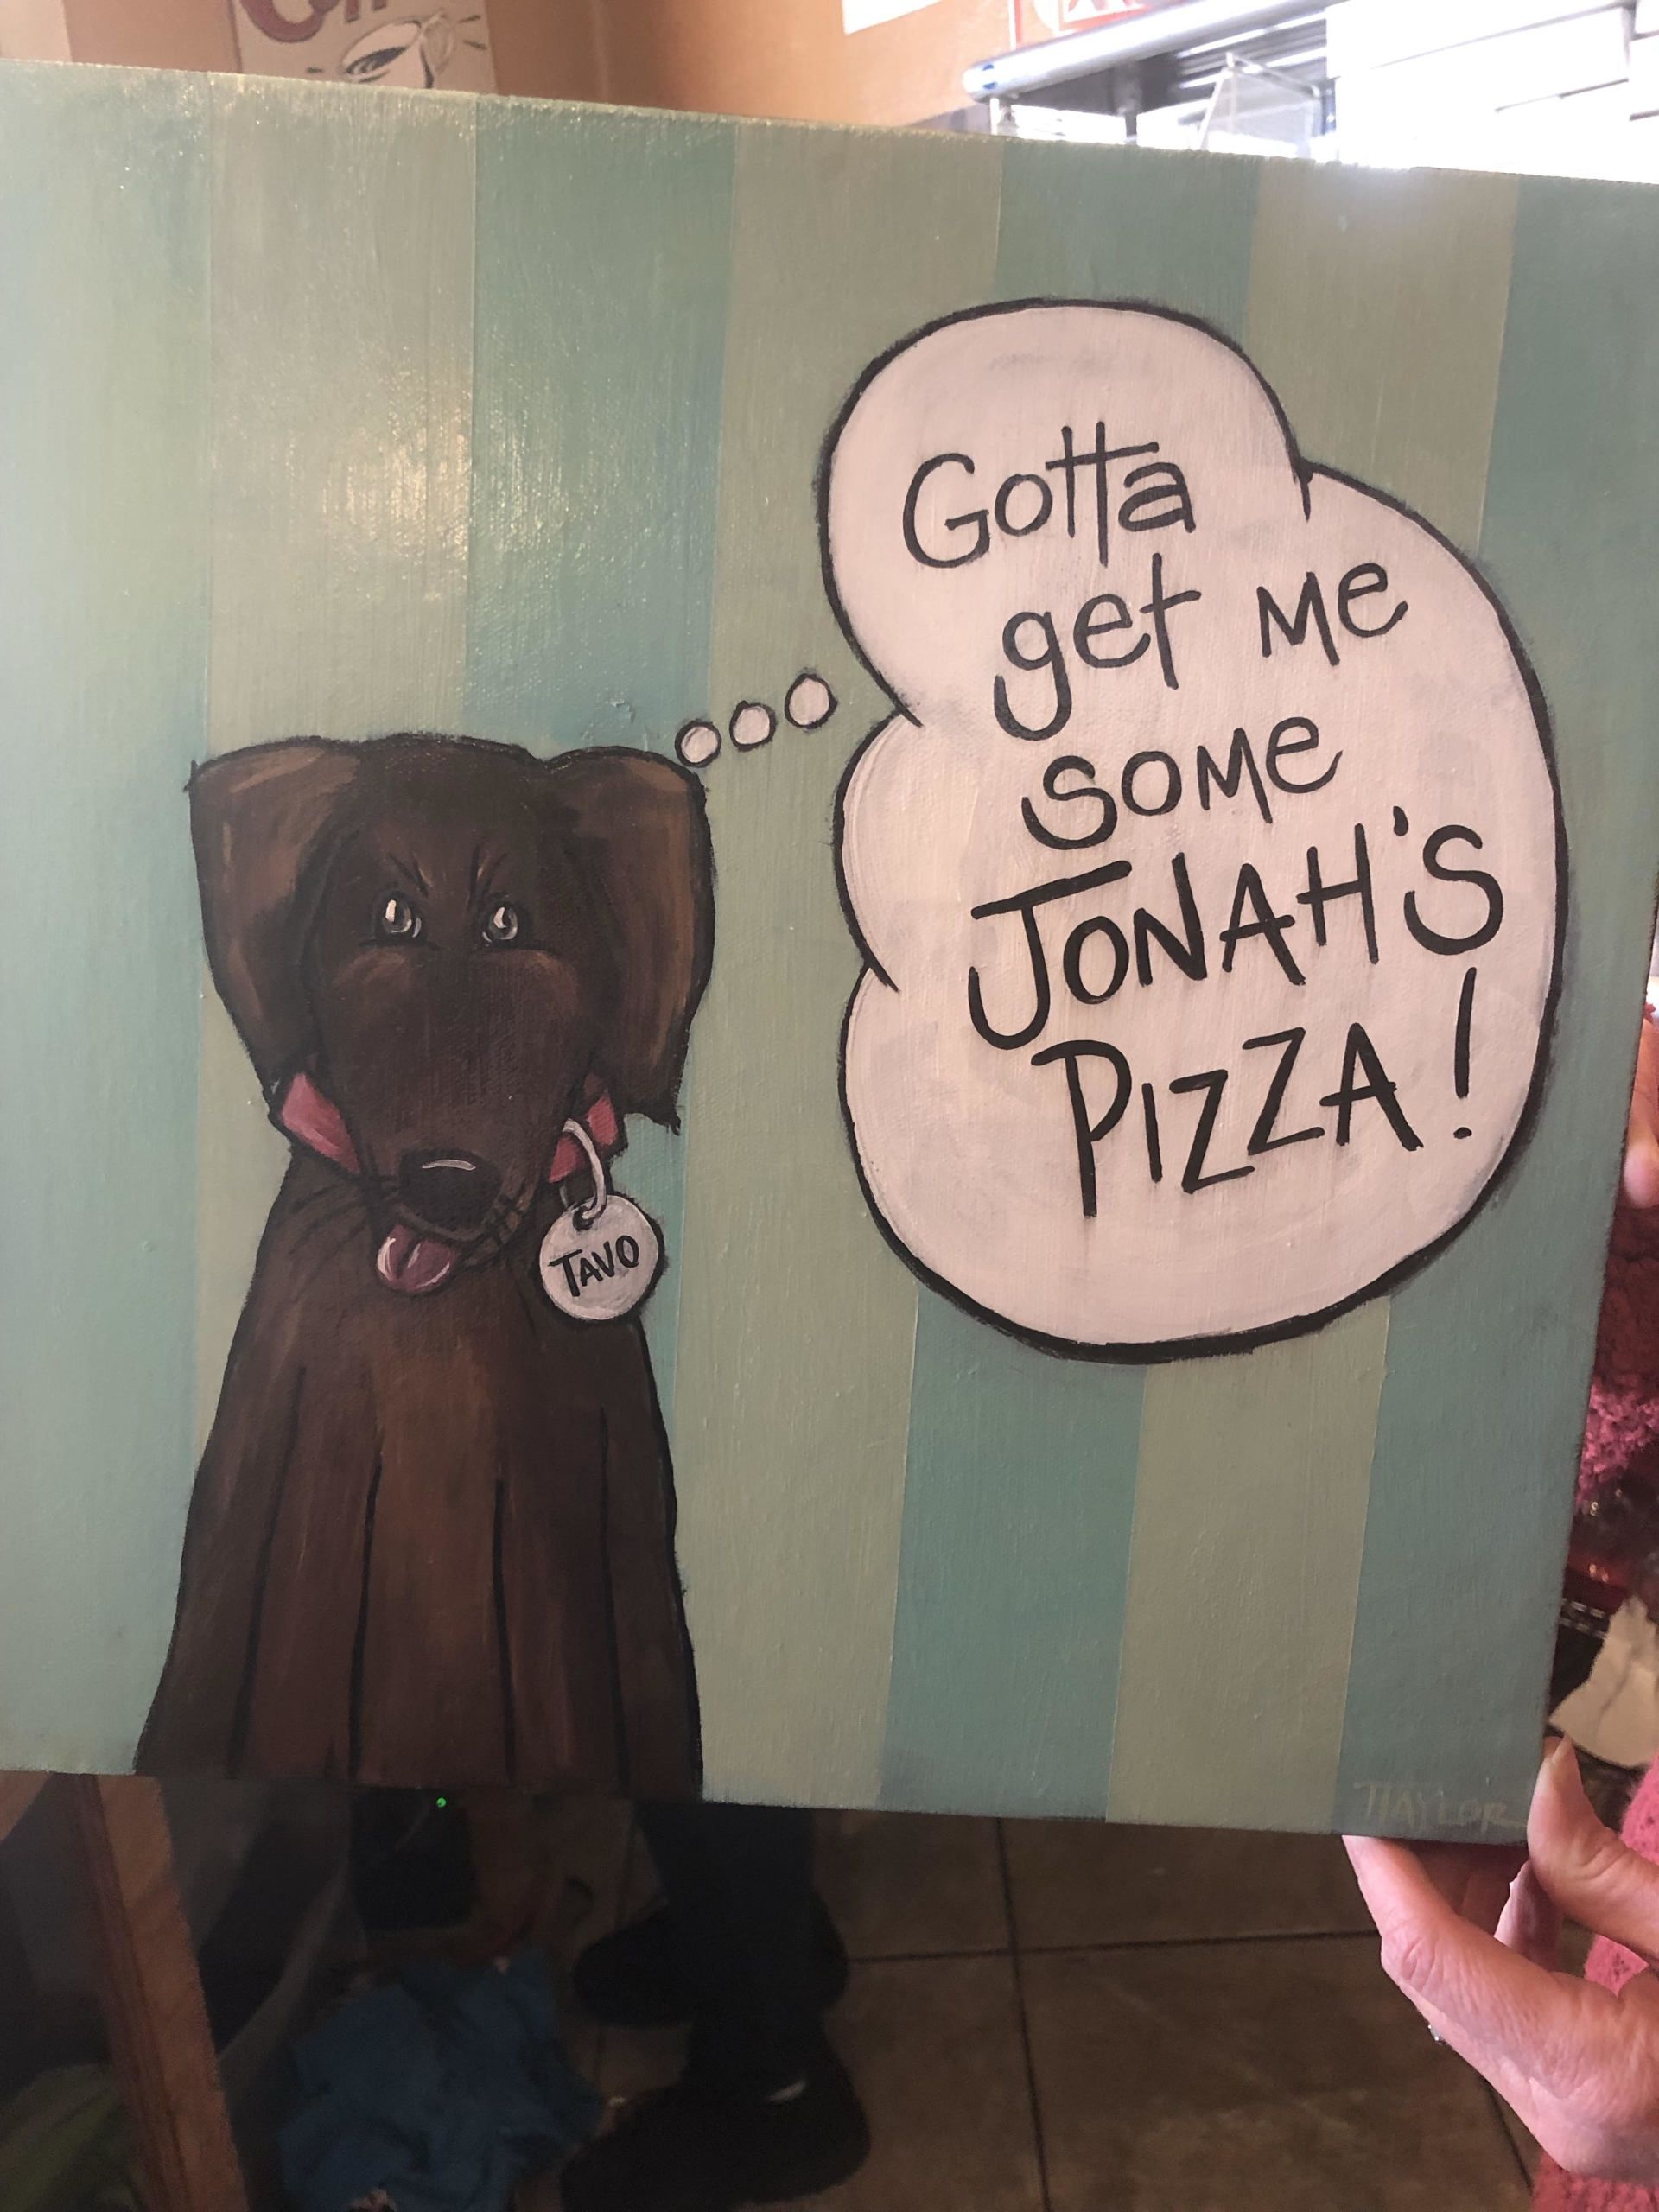 Forsyth GA  Roundup - Supper and Meeting at Jonah's on Johnston in Forsyth at 6:30 on Jun 20th @ Jonah's on Johnston Pizza